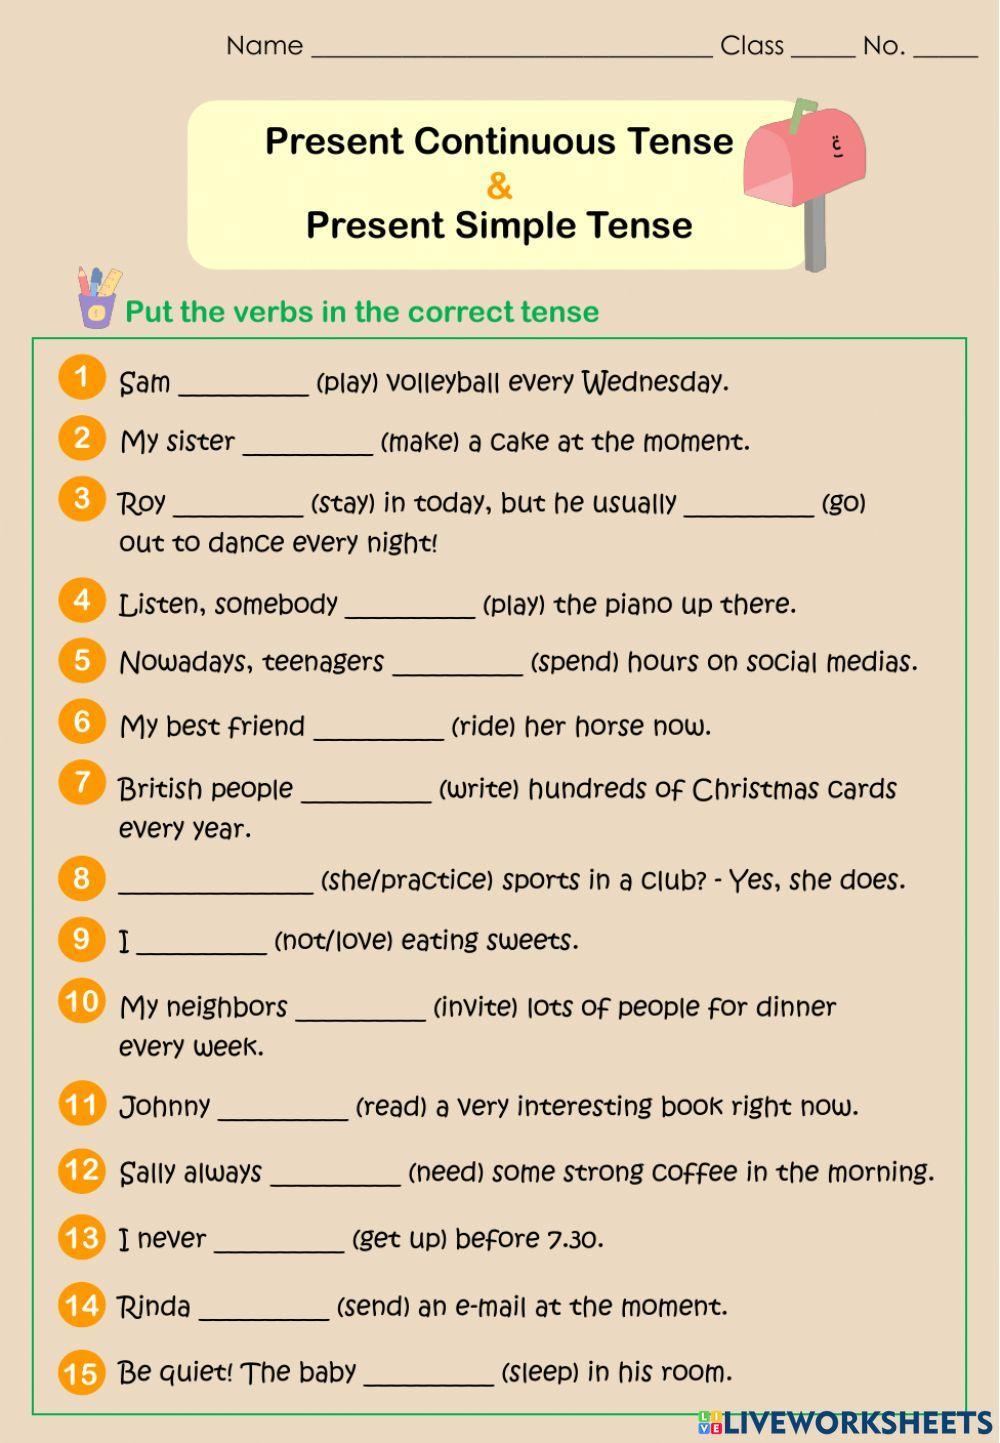 Present Continuous and Present Simple Tense